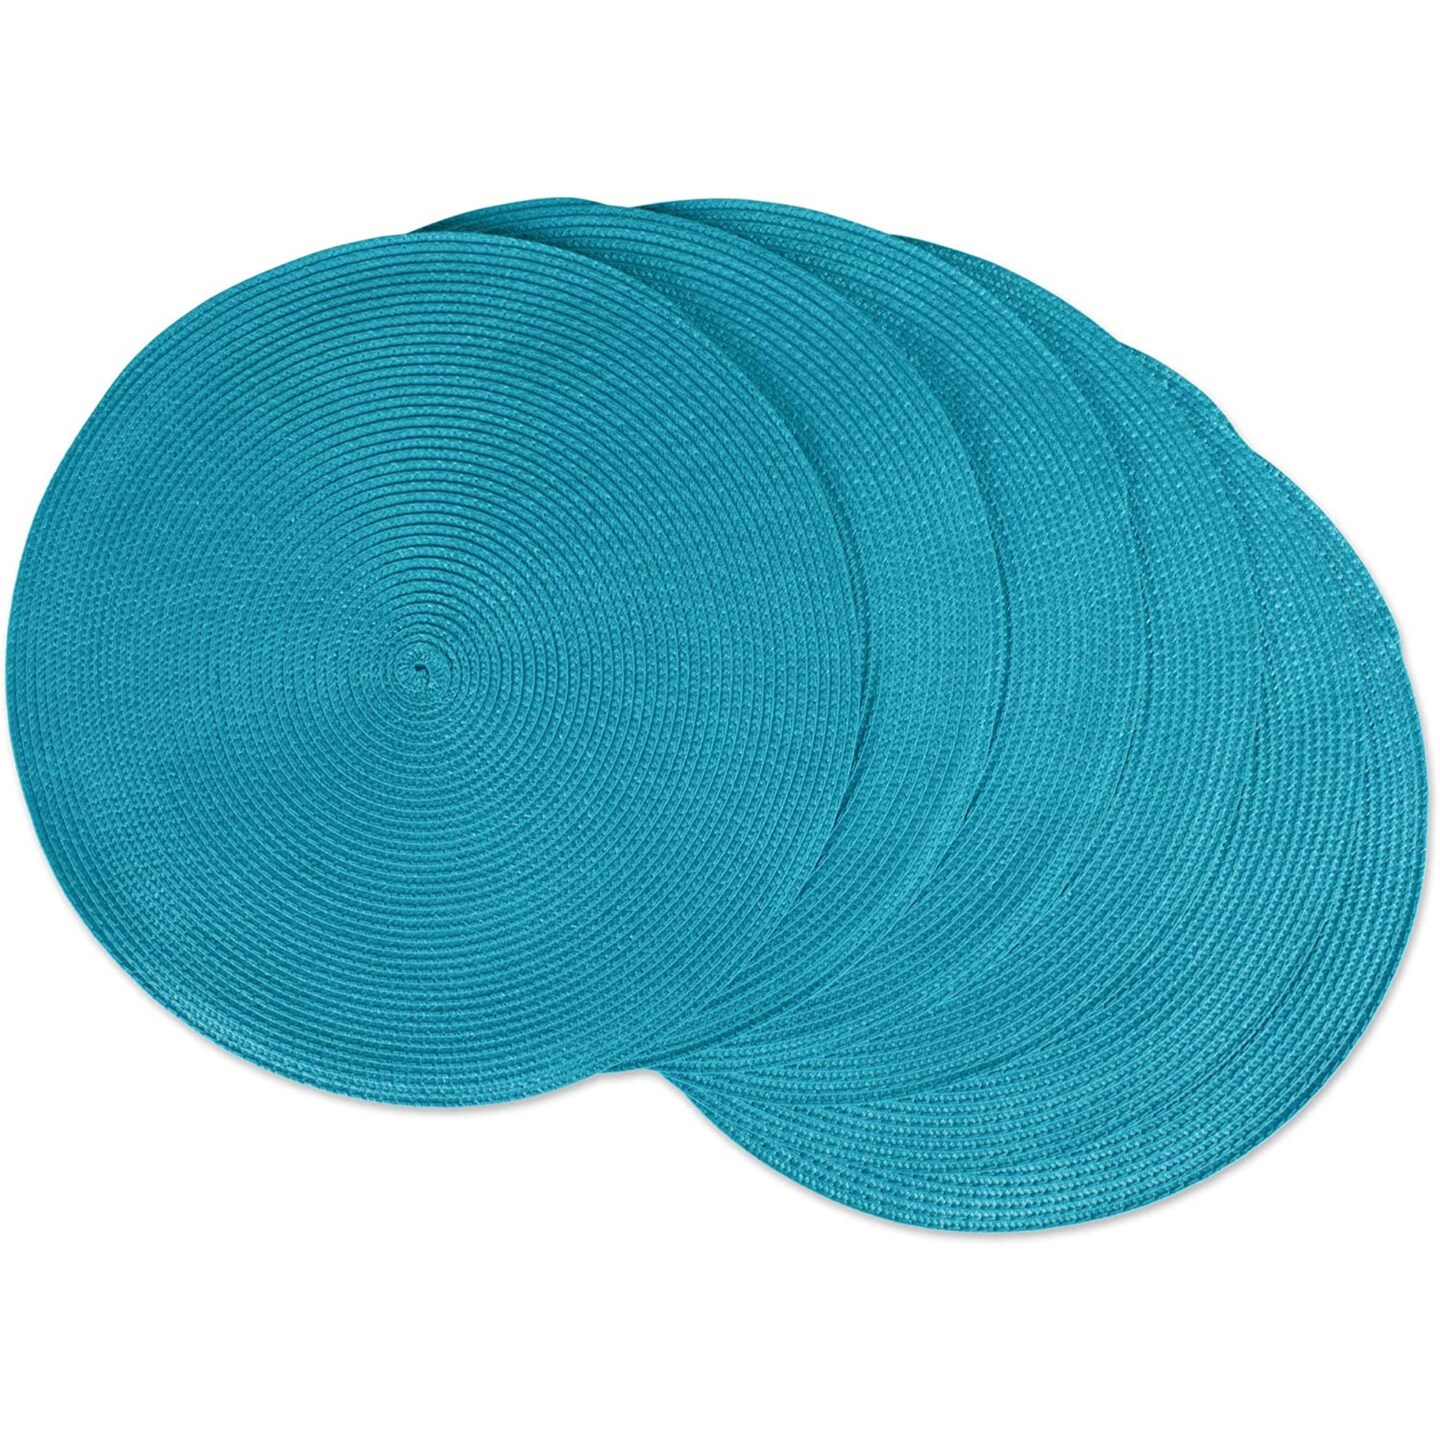 PLACEMAT ROUND PP WOVEN BAJA BLUE Set of 6